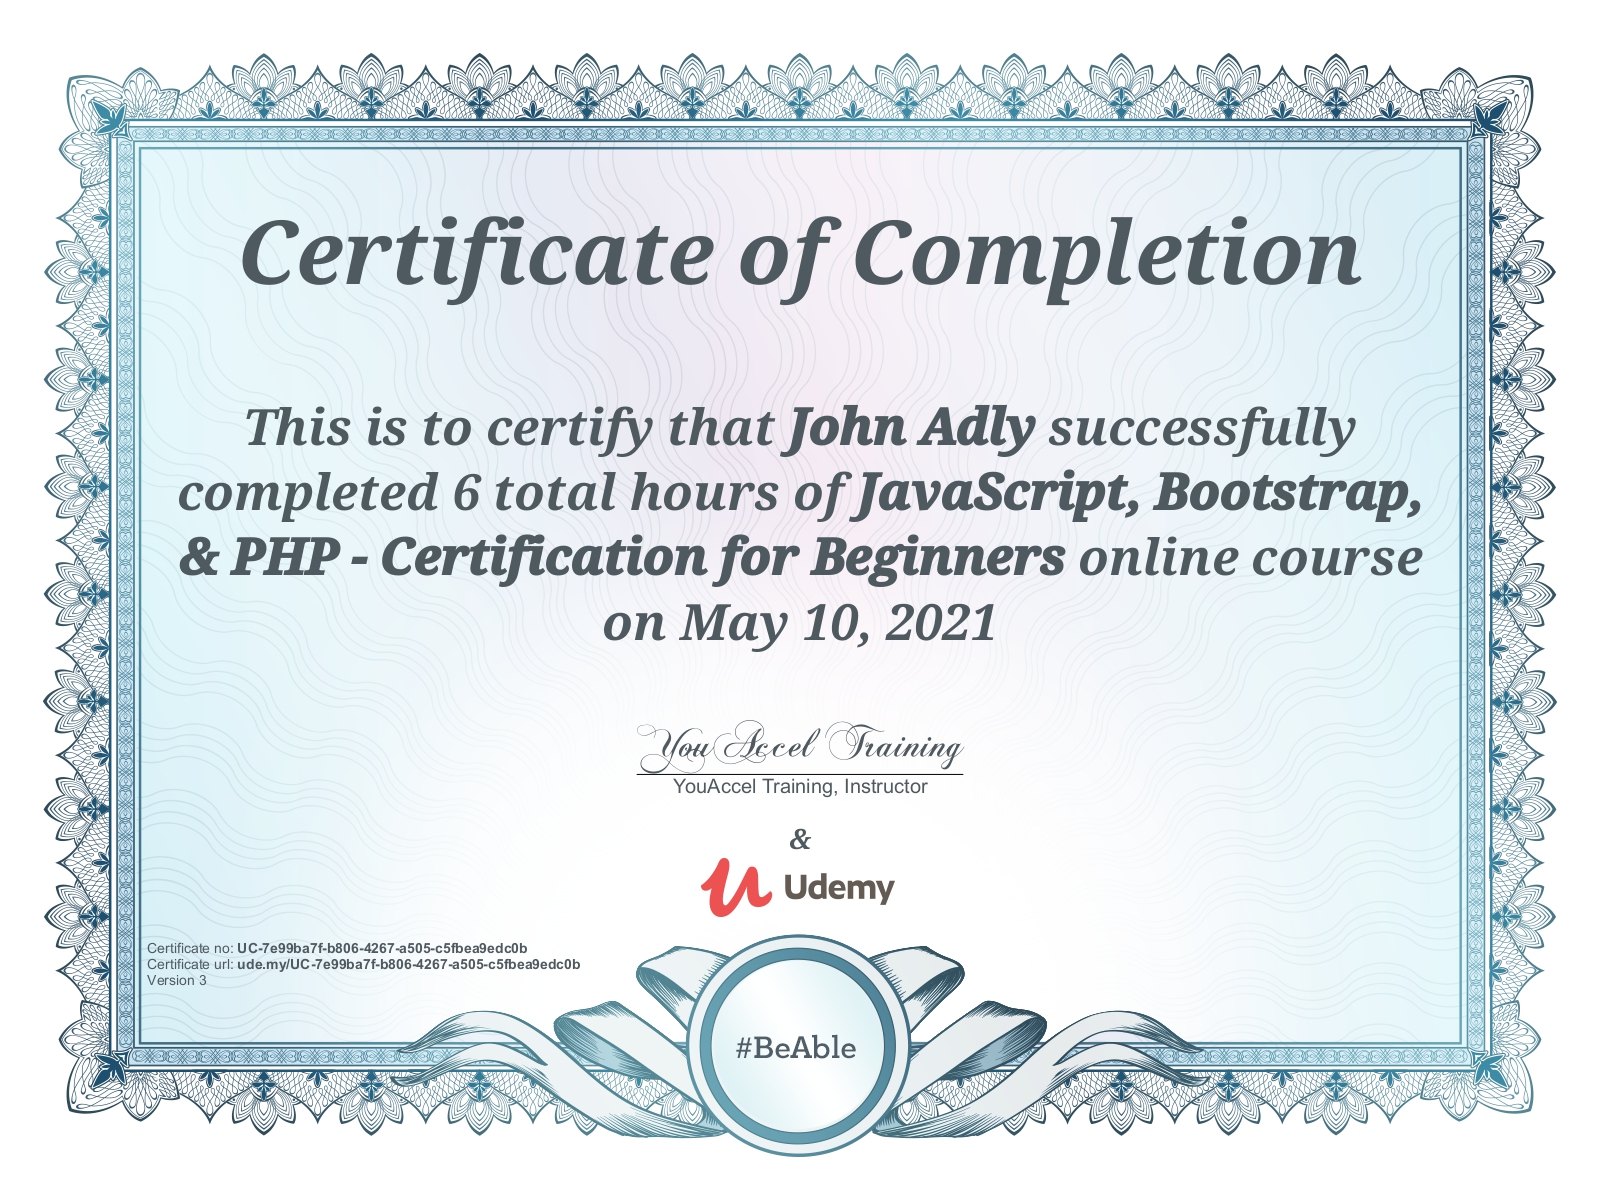 JavaScript, Bootstrap, PHP - Certification for Beginners